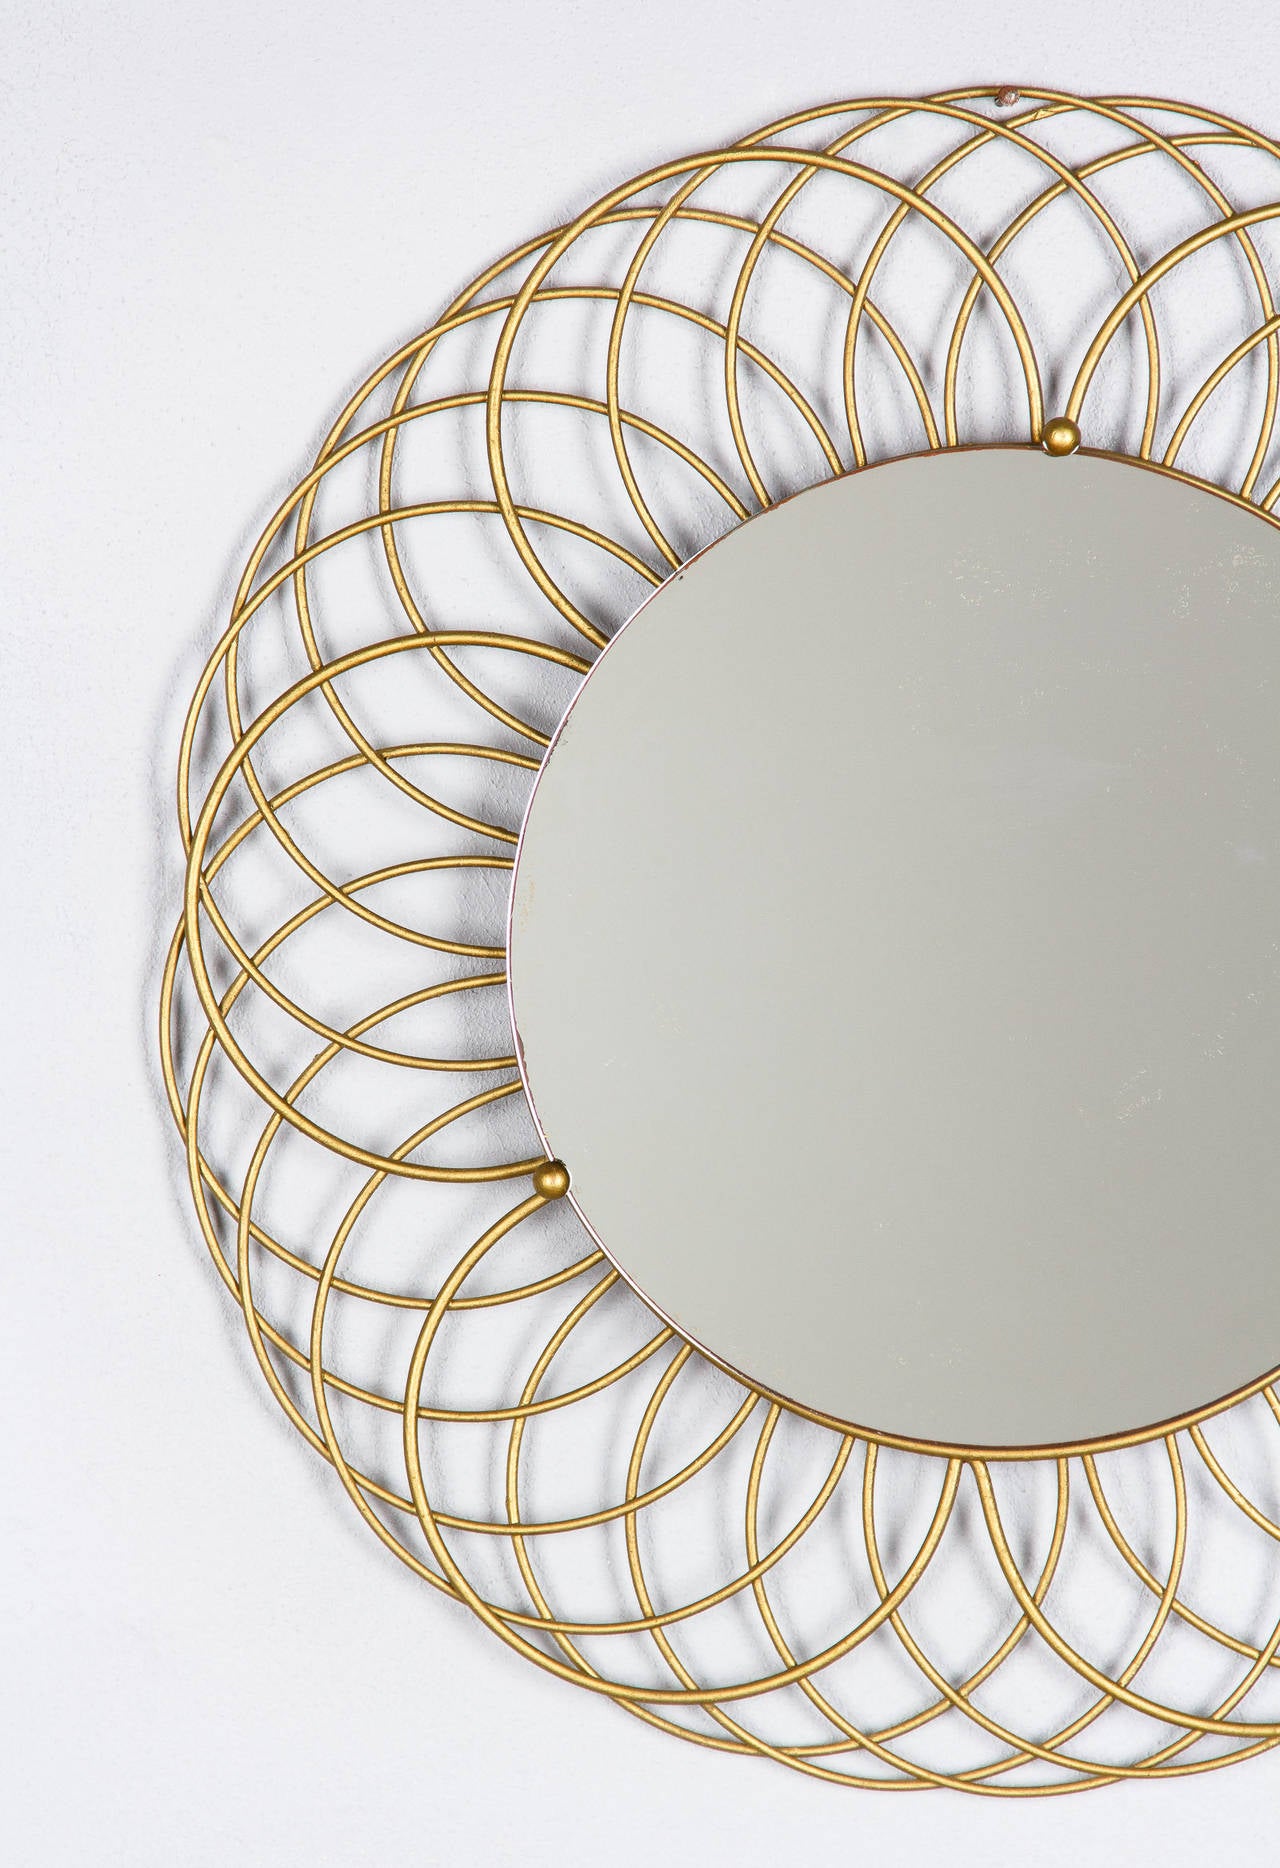 A very decorative French 1960s round mirror with a spiral design brass frame. The mirrored glass itself is 12